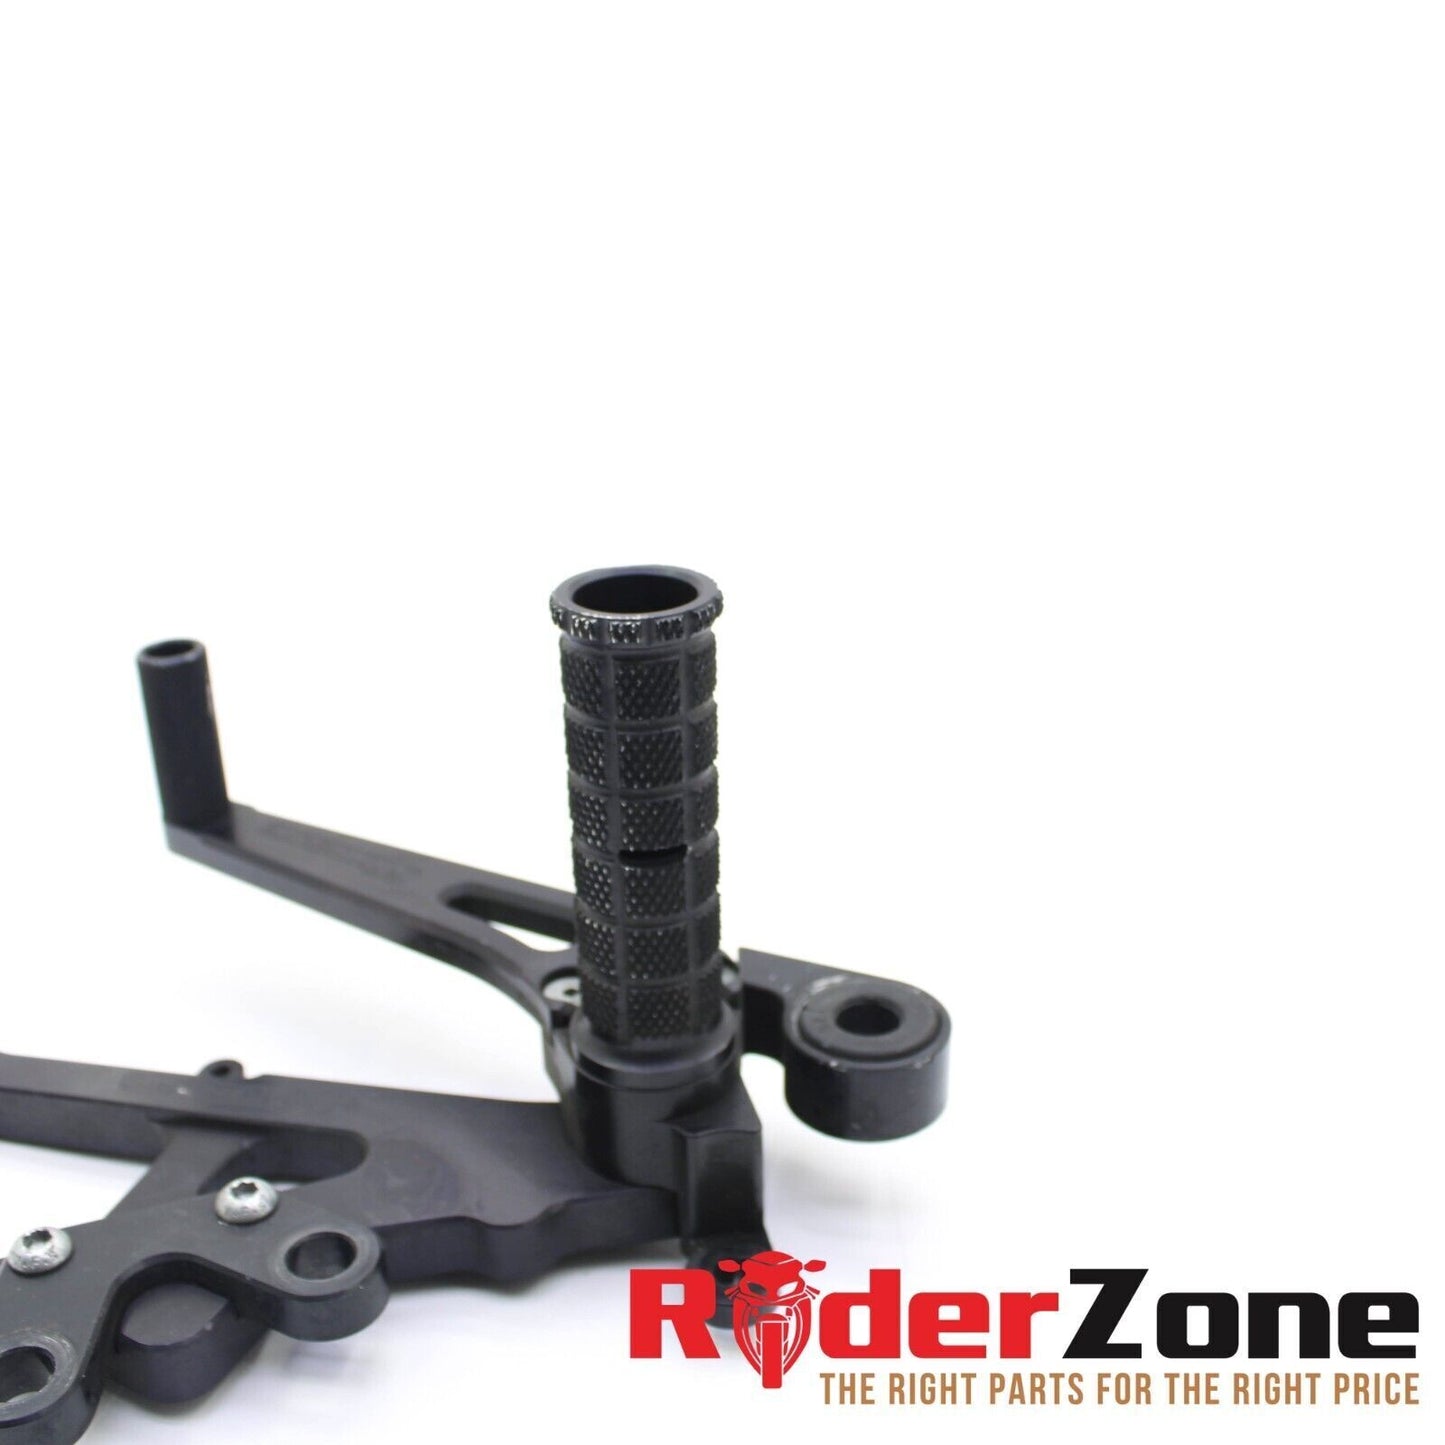 2008 - 2016 YAMAHA YZF R6 CFMOTORSPORTS REARSETS TRACK FOCUSED PEGS REAR SETS OE